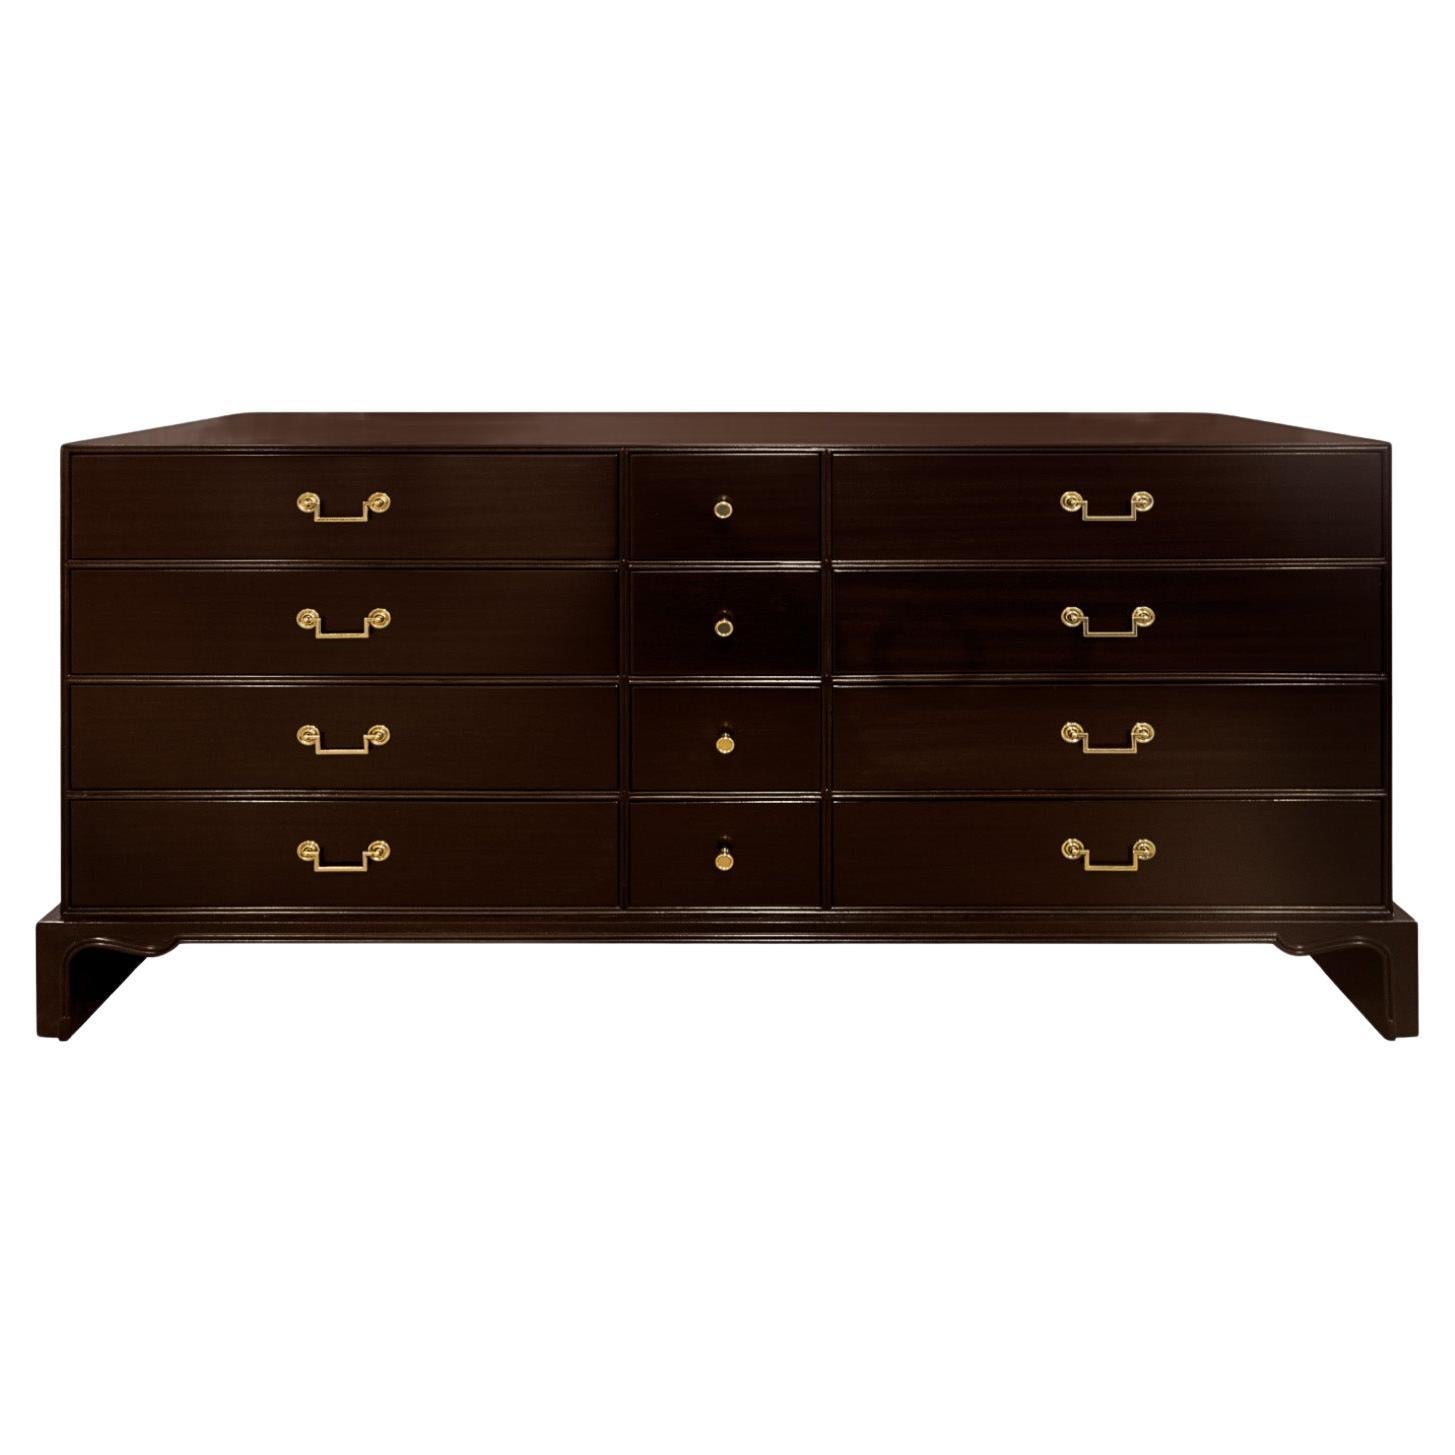 Tommi Parzinger Elegant Chest Of Drawers with Brass Pulls 1940s (Signed)